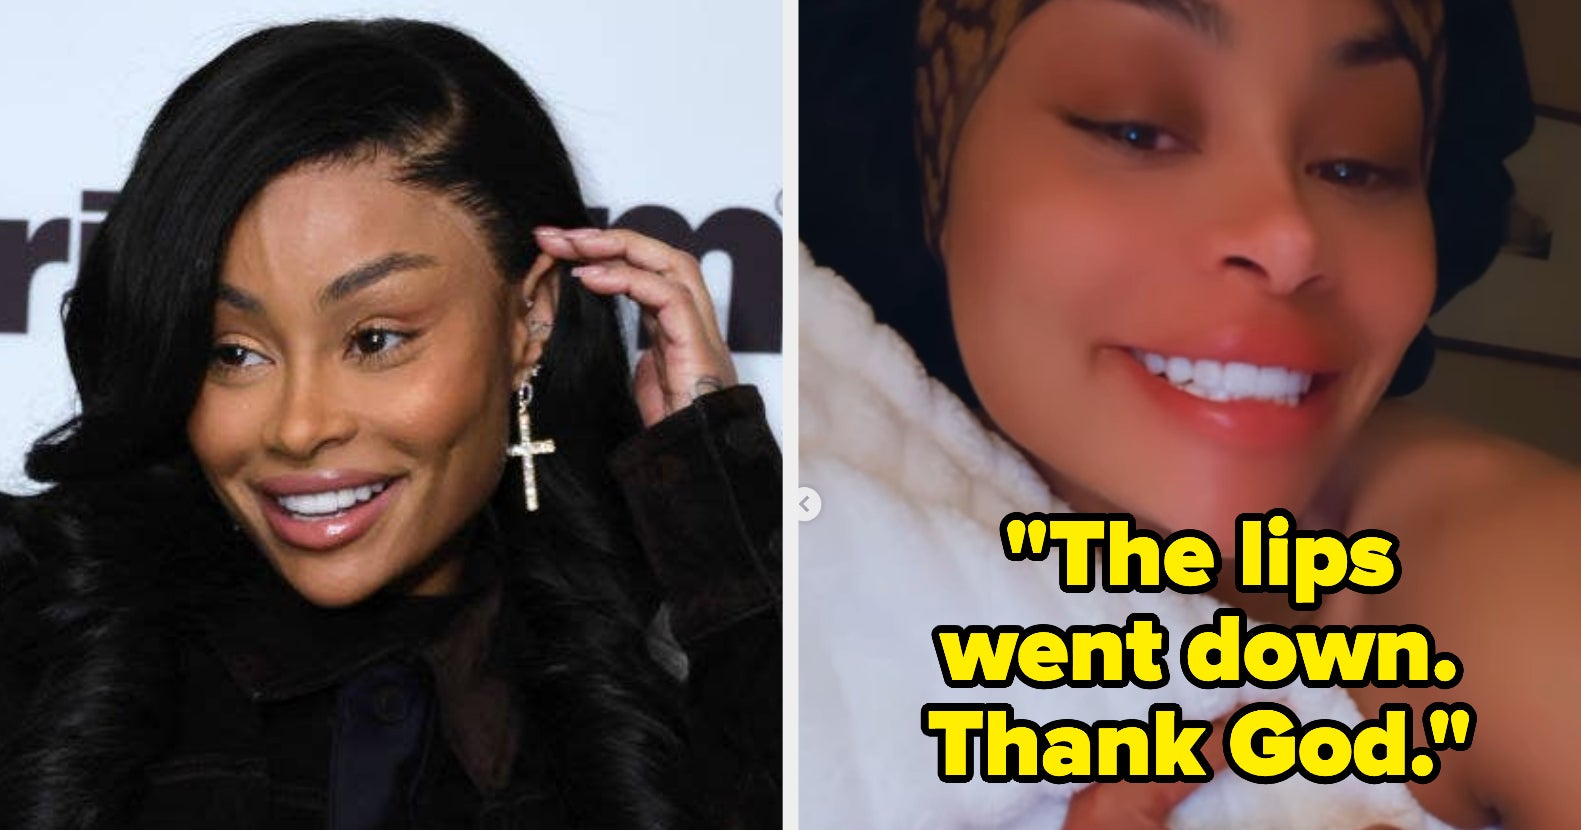 Blac Chyna shows off chiseled cheekbones after removing filler